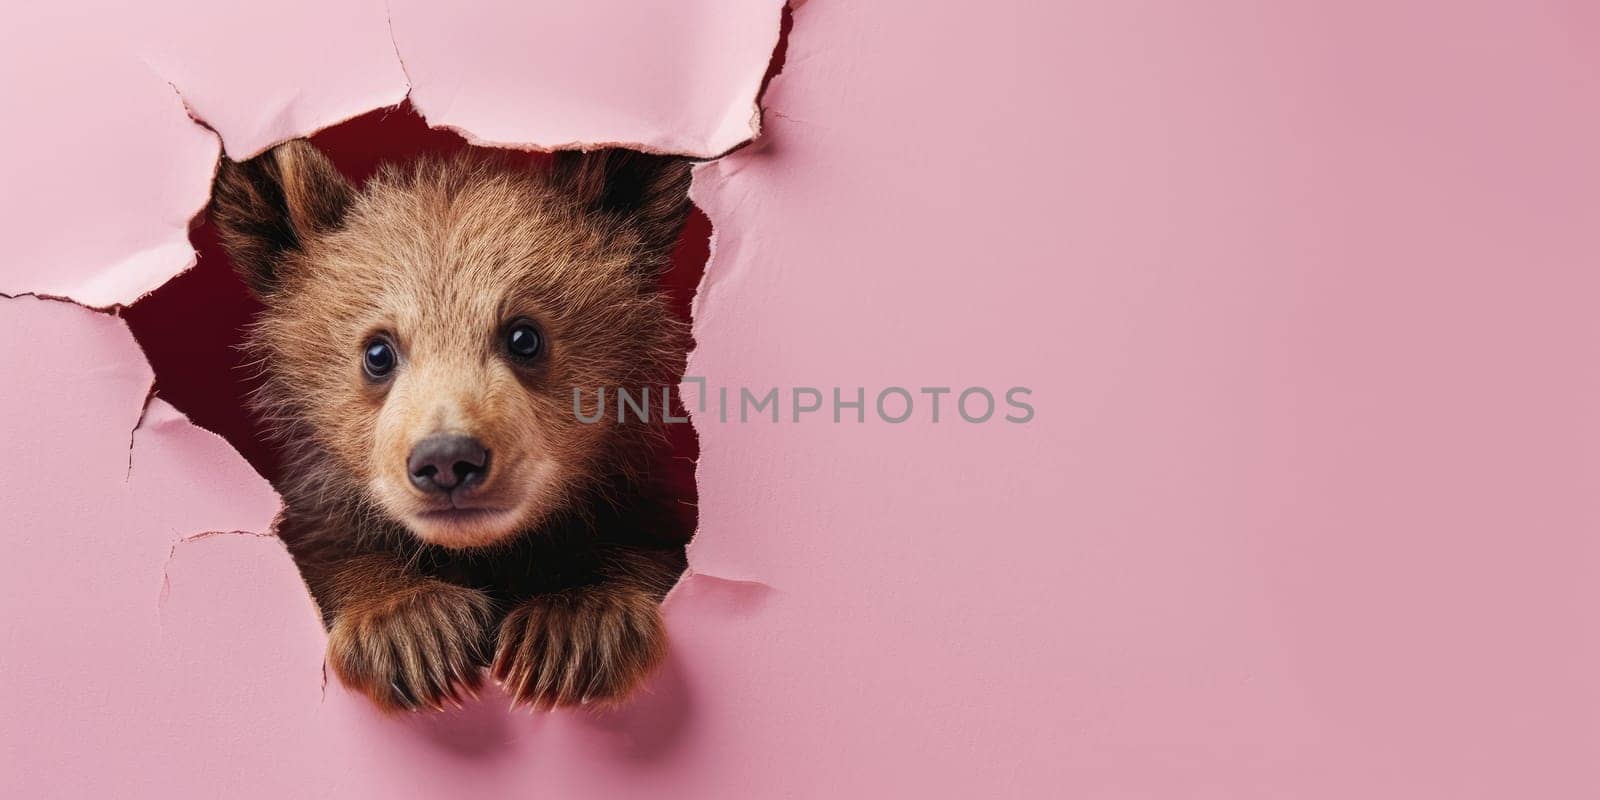 Zoom in picture of breaking pink wall and the bear in hollow pink hole. AIGX03. by biancoblue